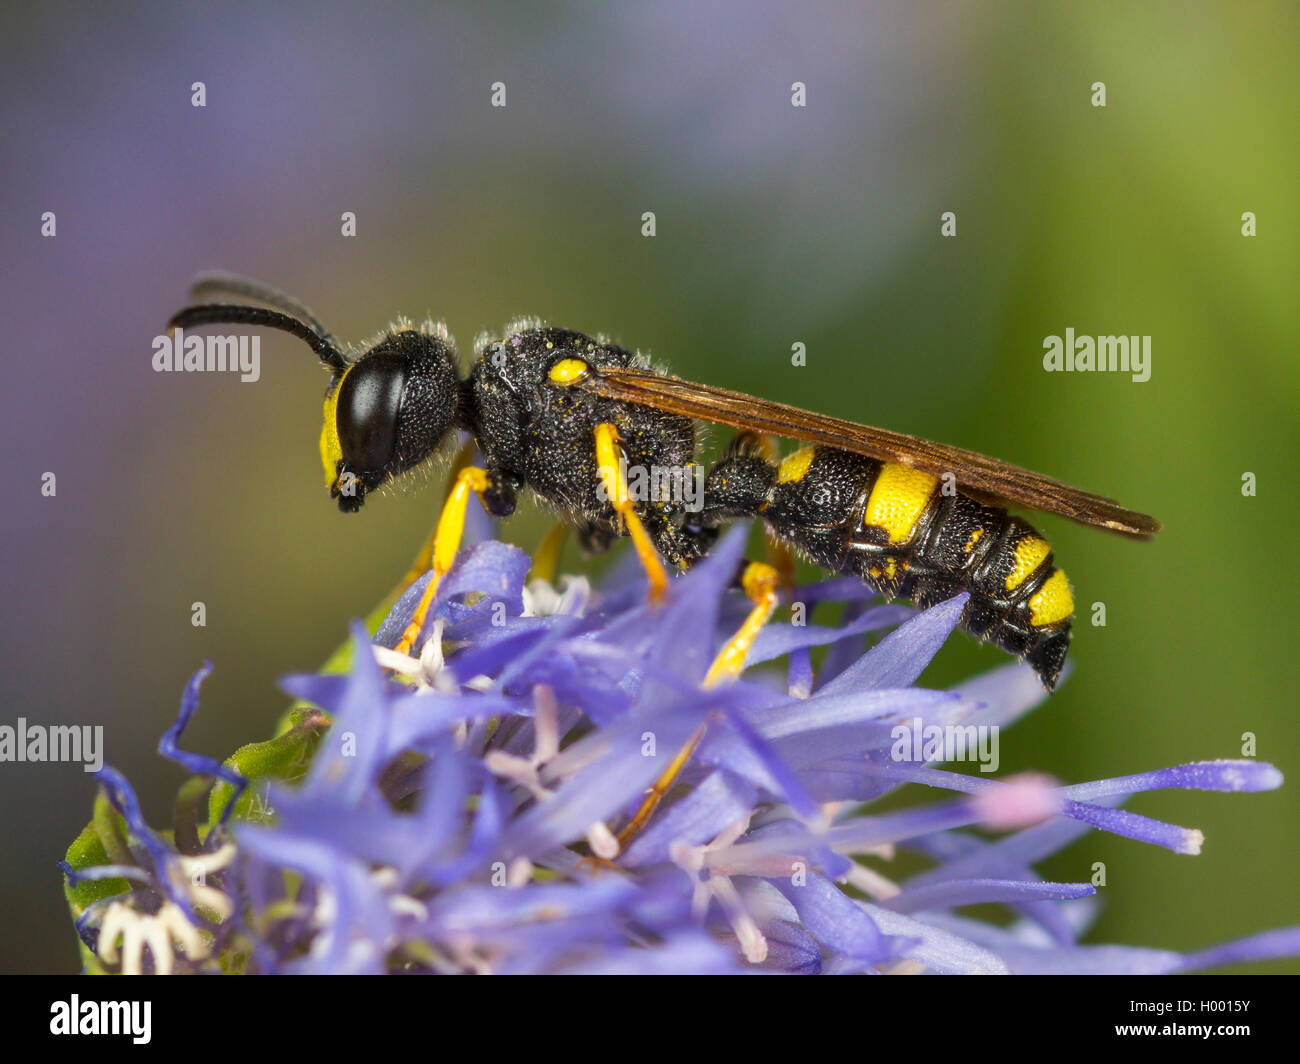 Ornate Tailed Digger Wasp (Cerceris rybyensis), Male foraging on Sheep's Bit Scabious (Jasione montana), Germany Stock Photo